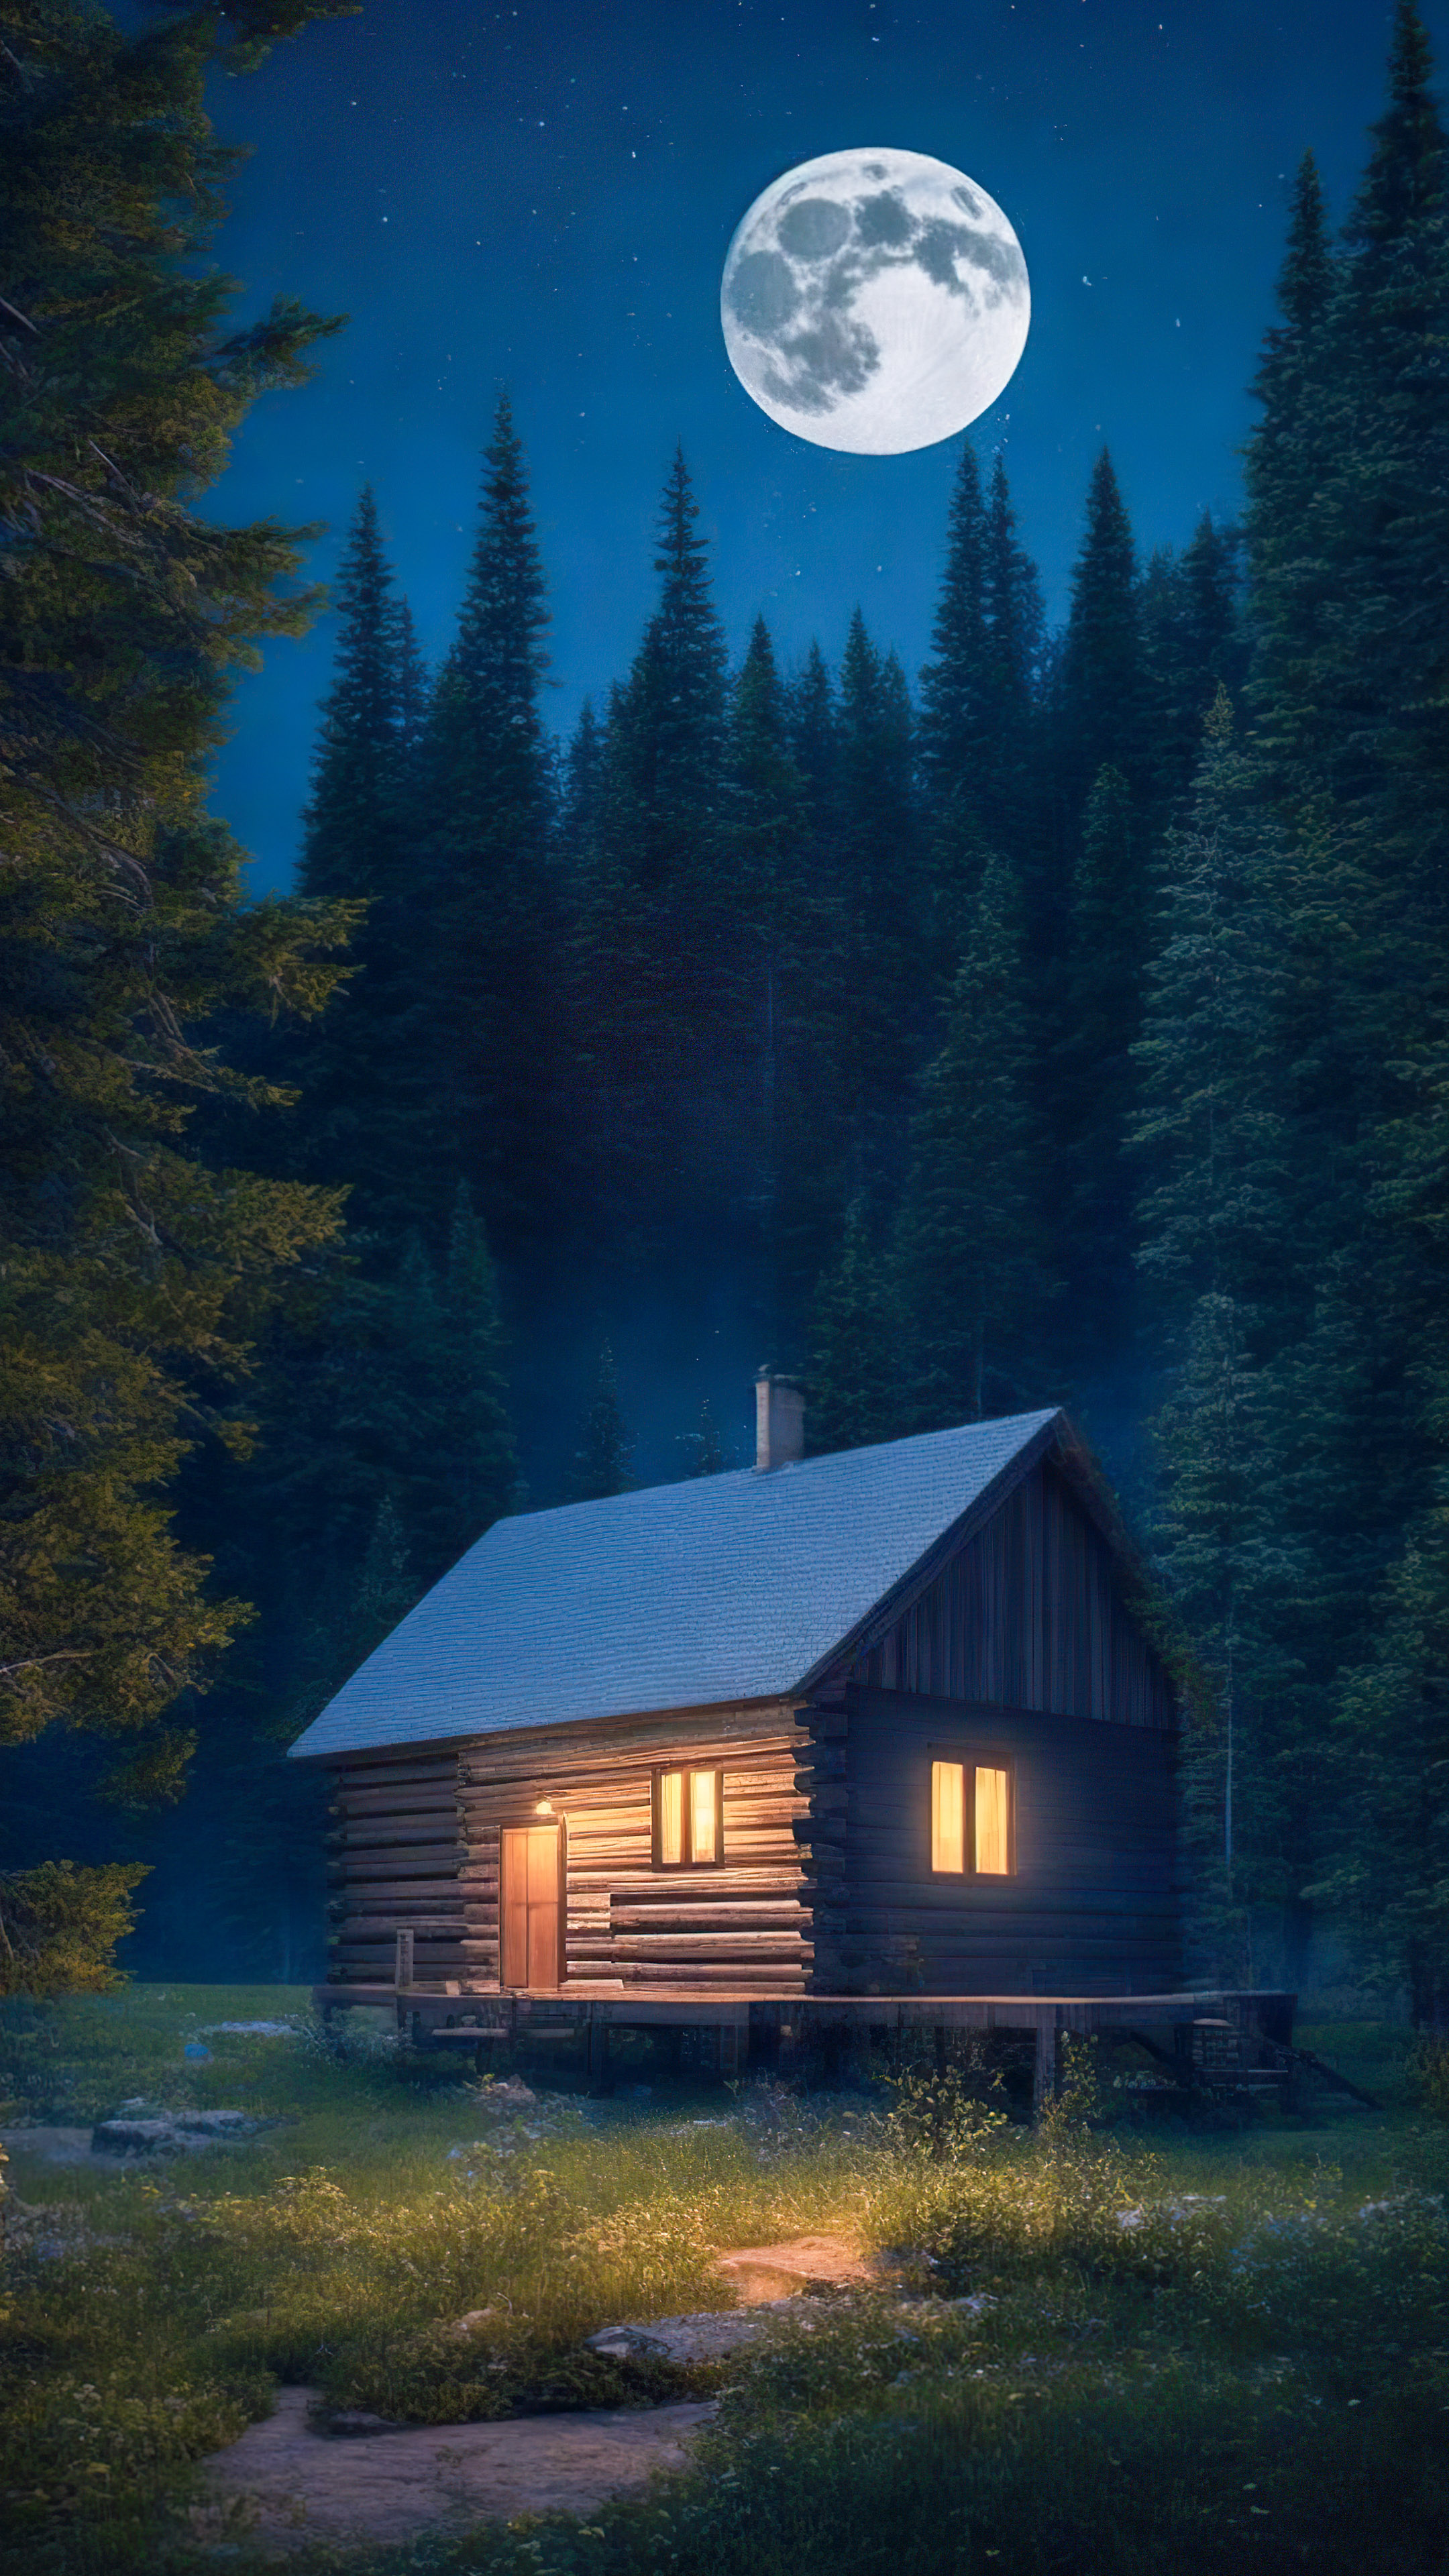 Adorn your phone with our night sky wallpaper, featuring a cozy cabin nestled among pine trees, bathed in the gentle light of a full moon.